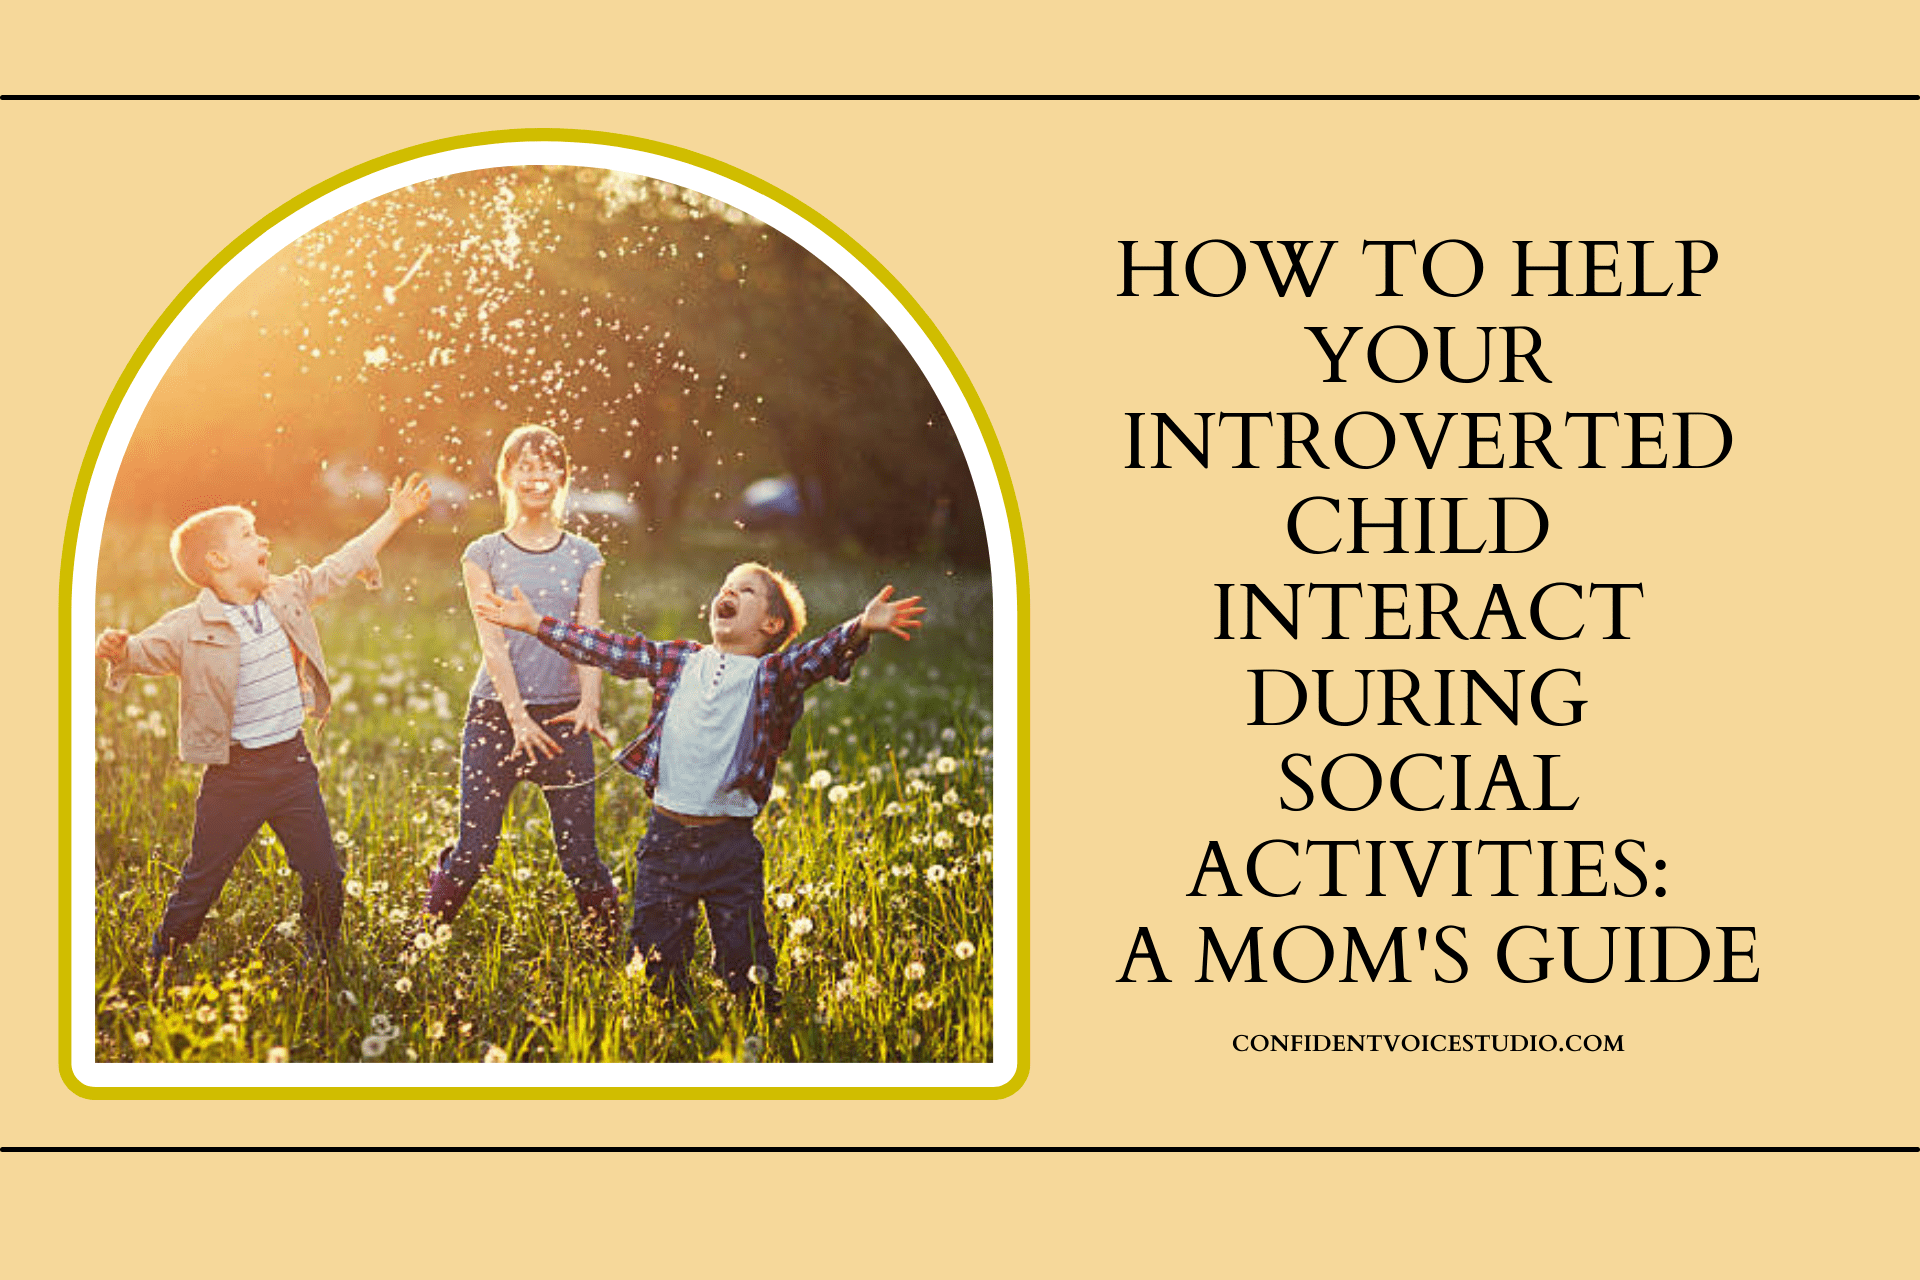 How to Help Your Introverted Child Interact During Social Activities